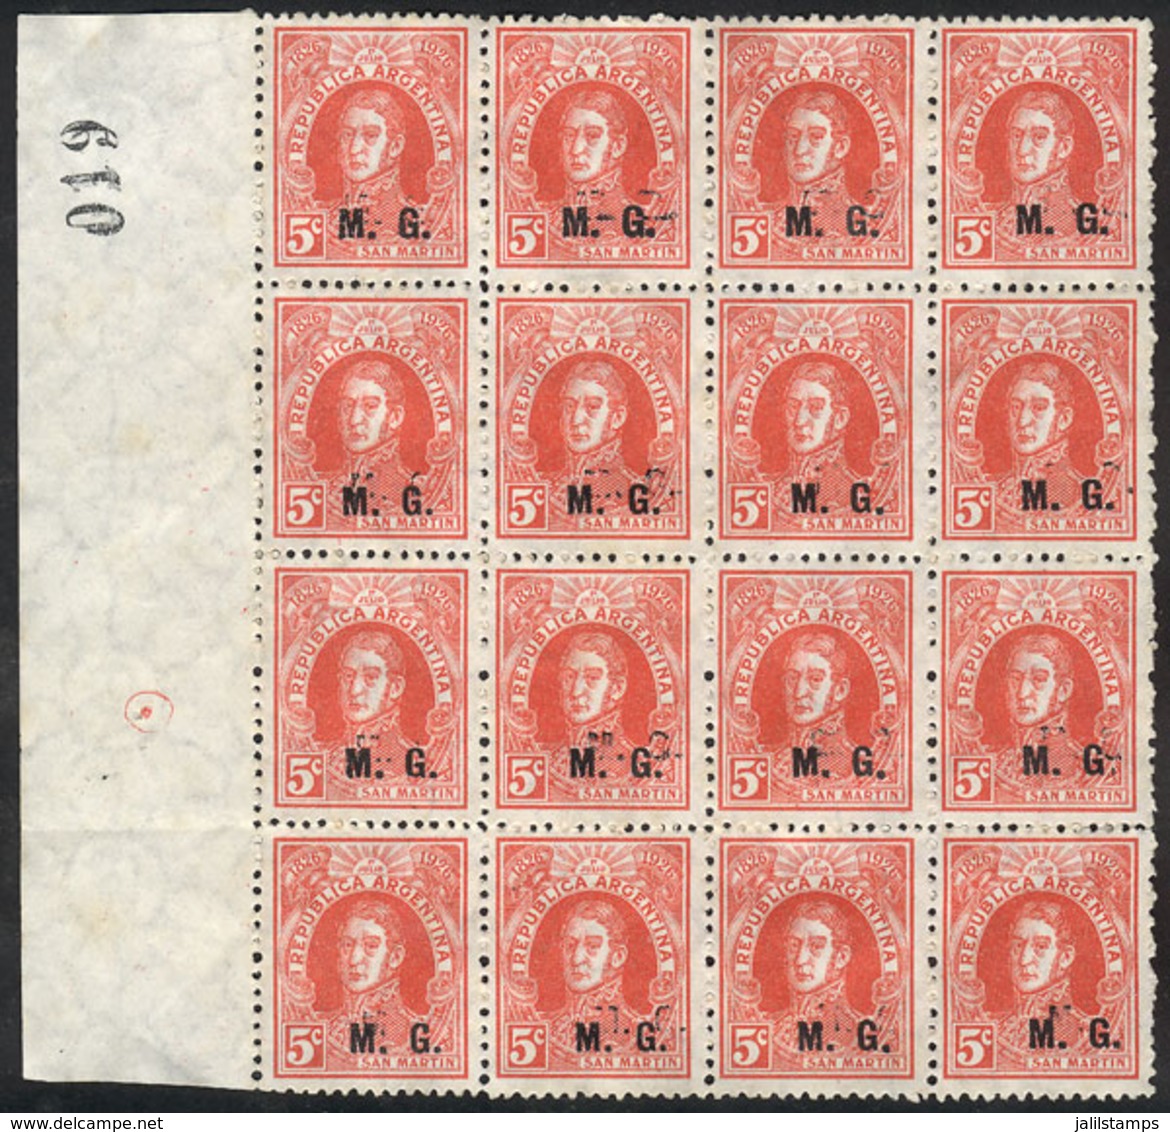 ARGENTINA: GJ.191a, With DOUBLE IMPRESSION Variety Of The Overprint (one Light), Mint Without Gum, Fine Quality, Rare! - Officials